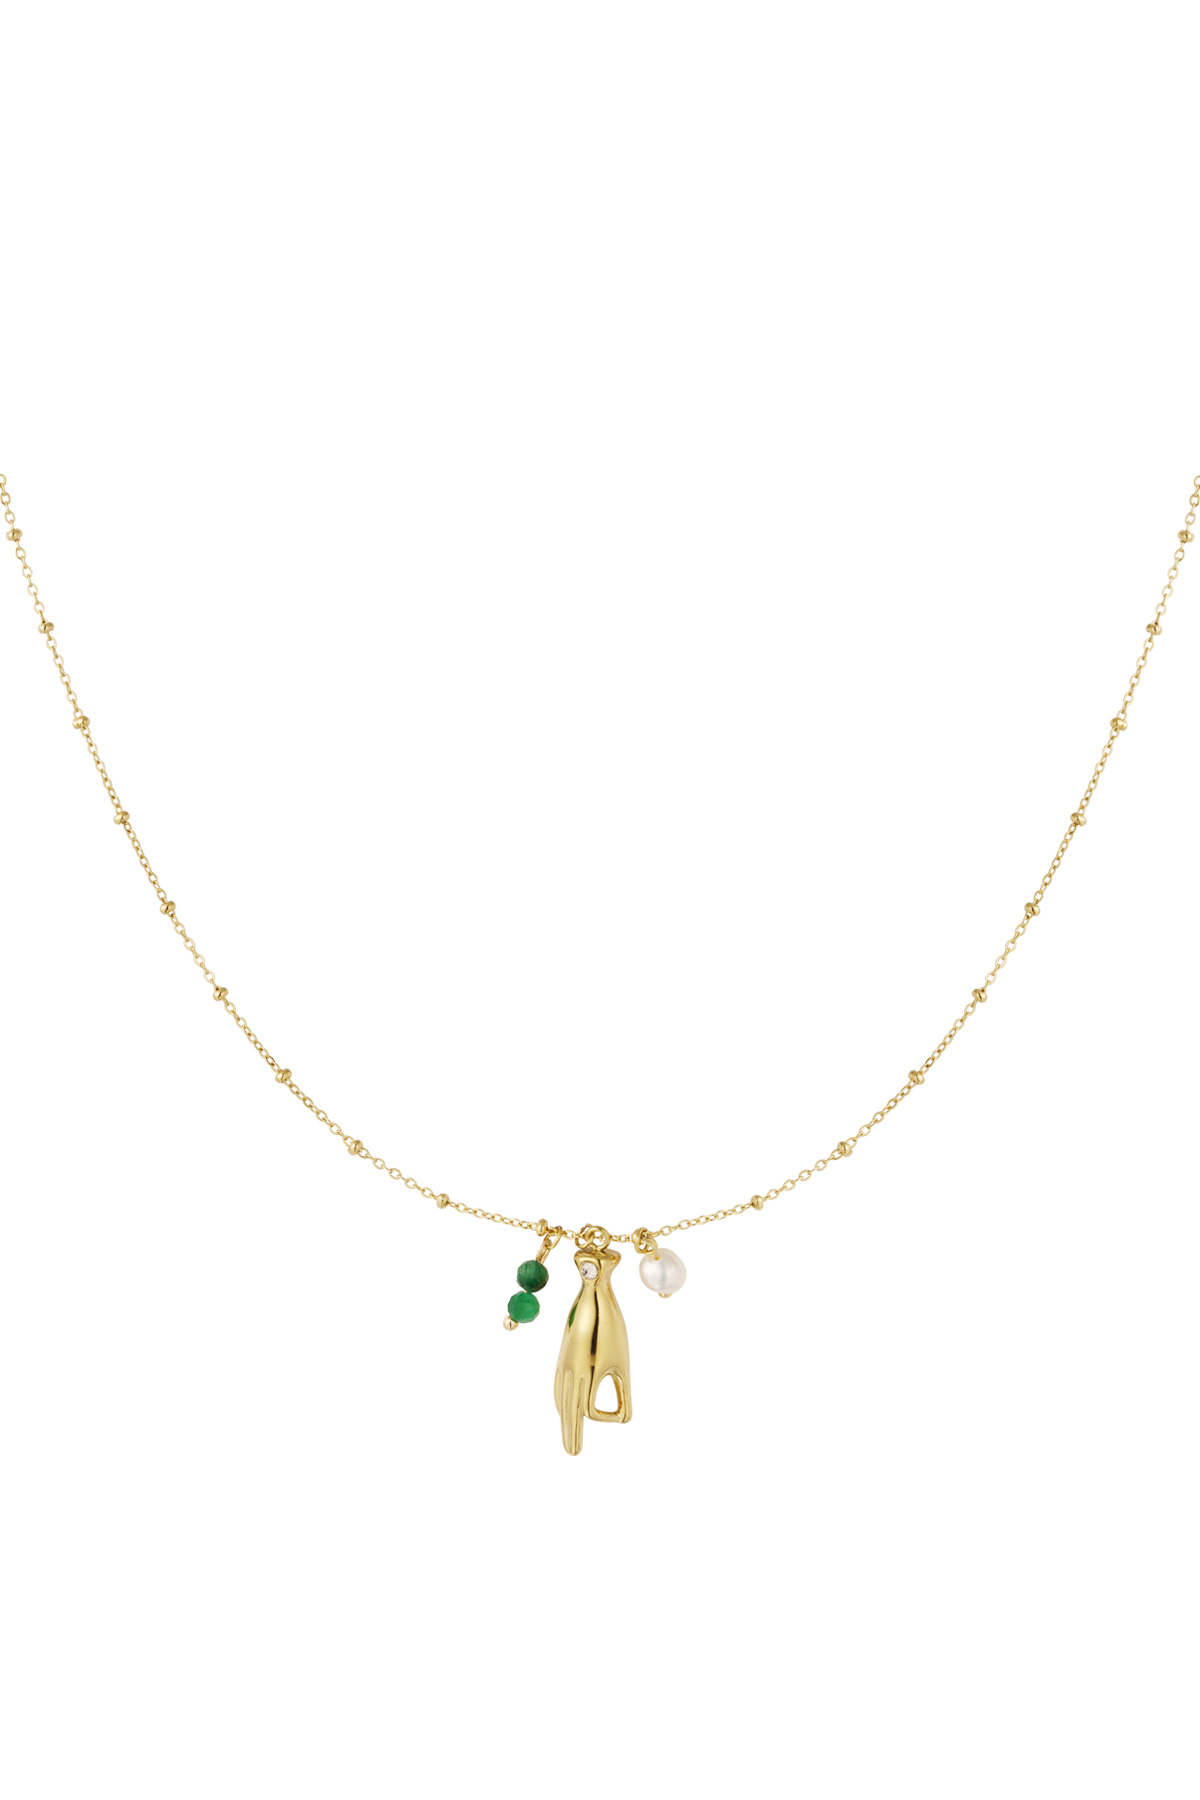 Necklace with open hand charm - green gold